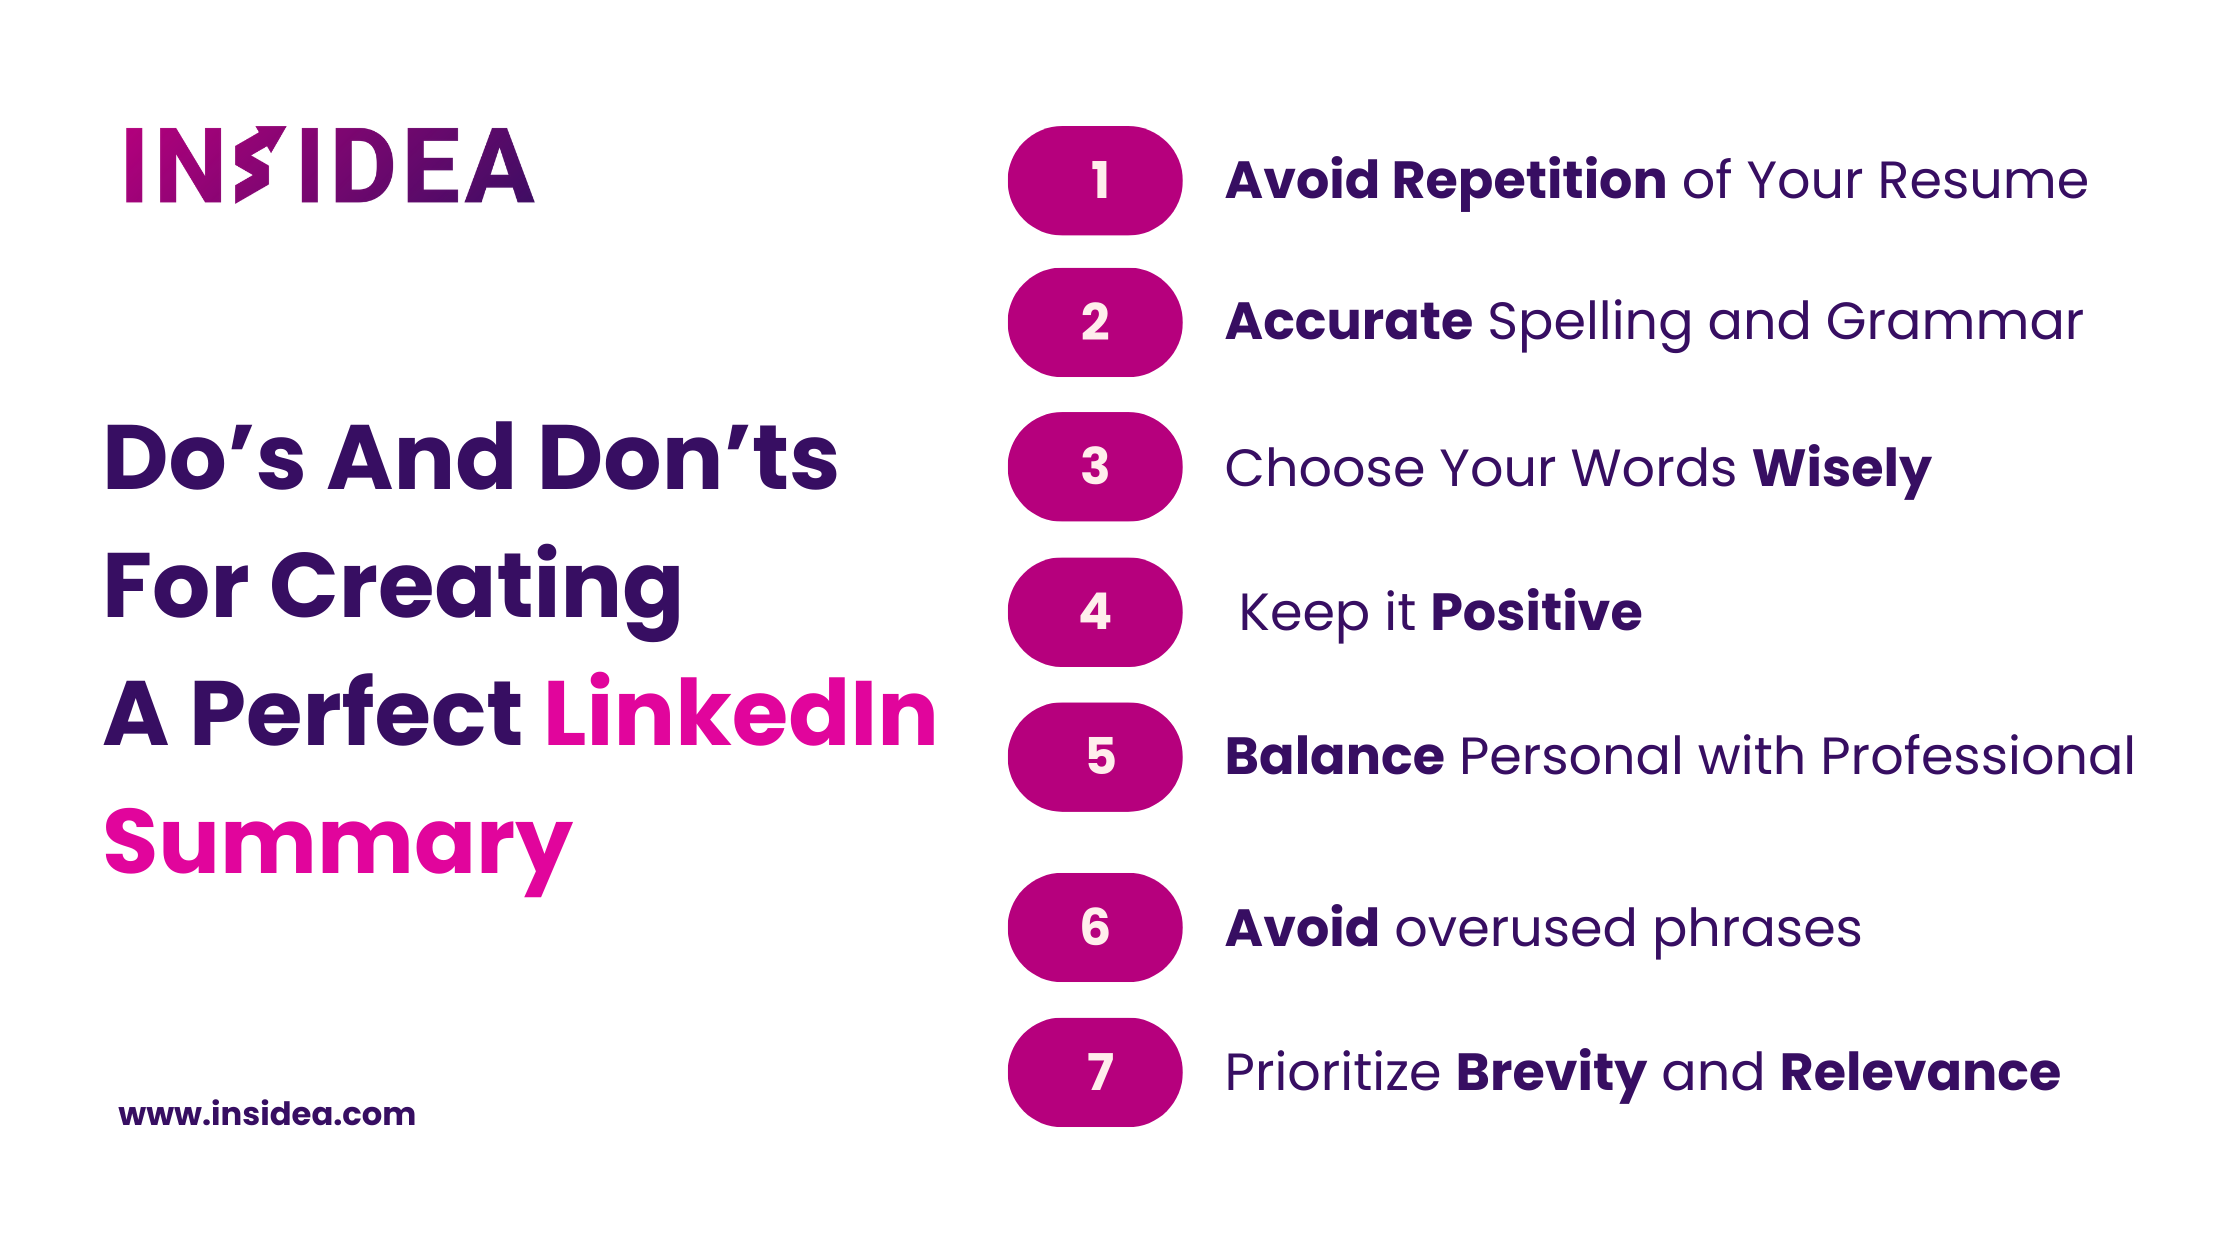 Do’s And Don’ts For Creating A Perfect LinkedIn Summary